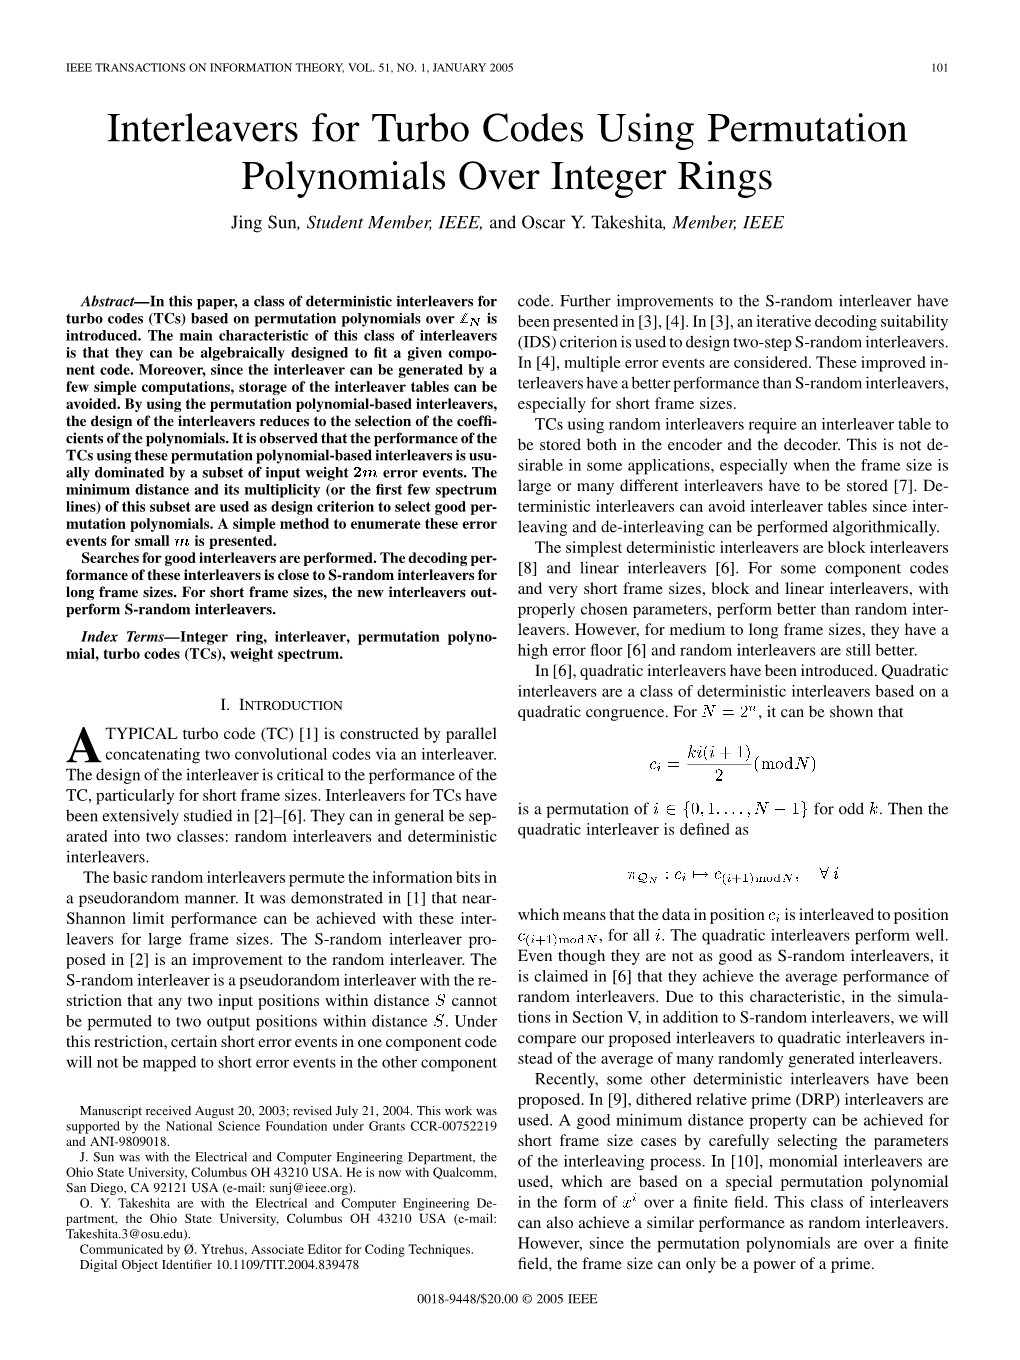 Interleavers for Turbo Codes Using Permutation Polynomials Over Integer Rings Jing Sun, Student Member, IEEE, and Oscar Y